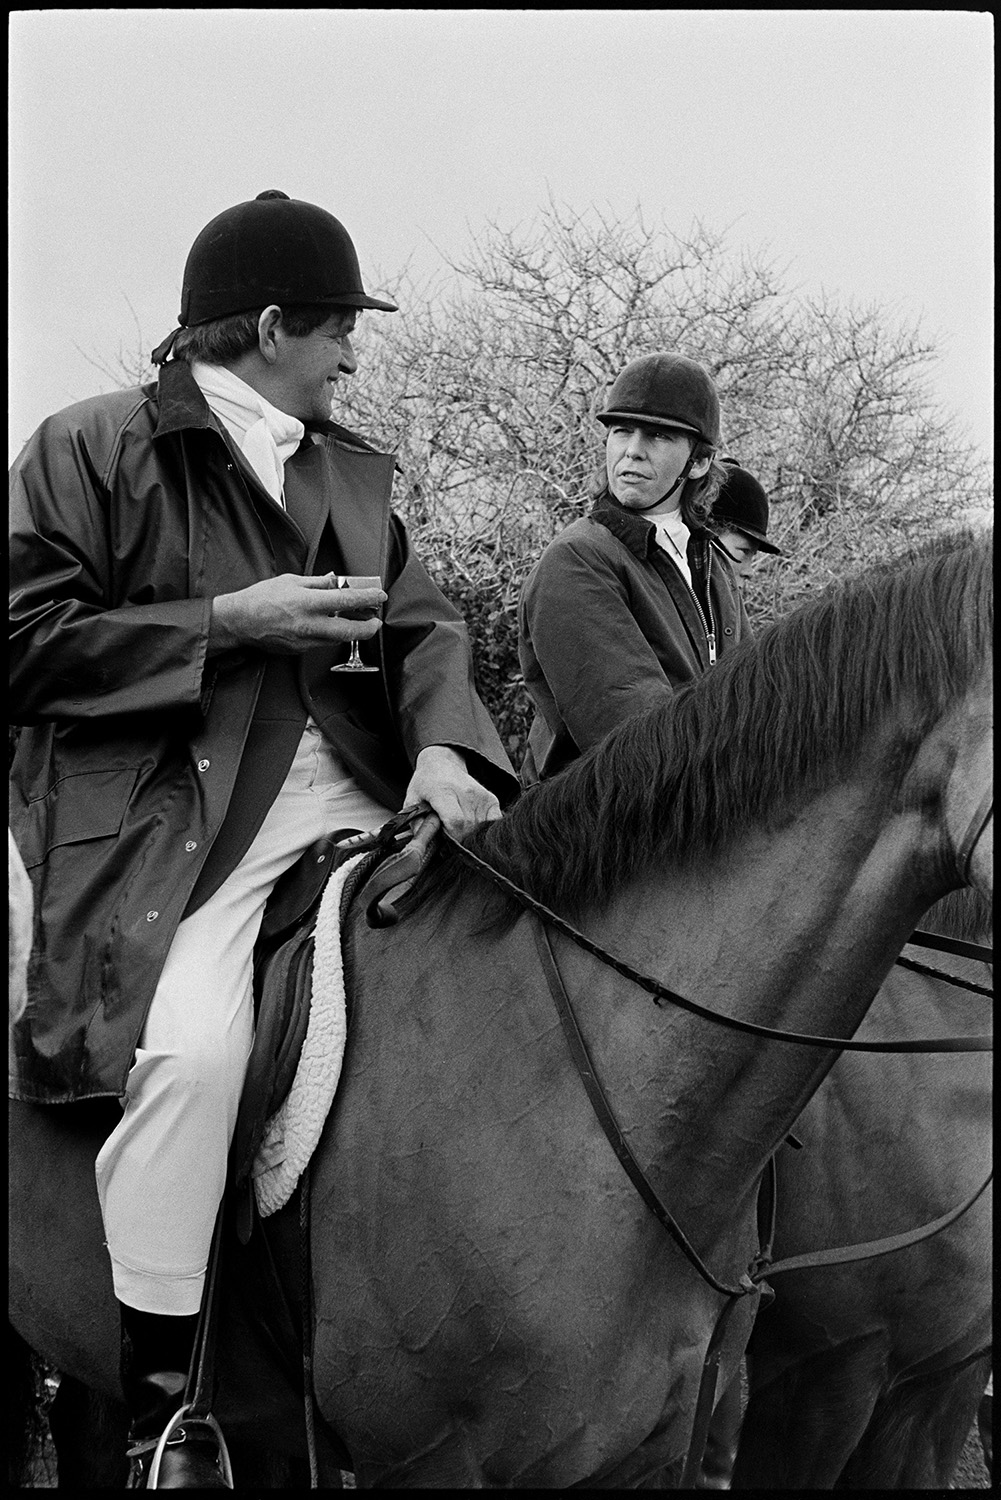 Hunt meet in village, setting off, horses and riders waiting in rain on lonely road. 
[A huntsman on horseback drinking a stirrup cup at a hunt meet in Petrockstowe.]